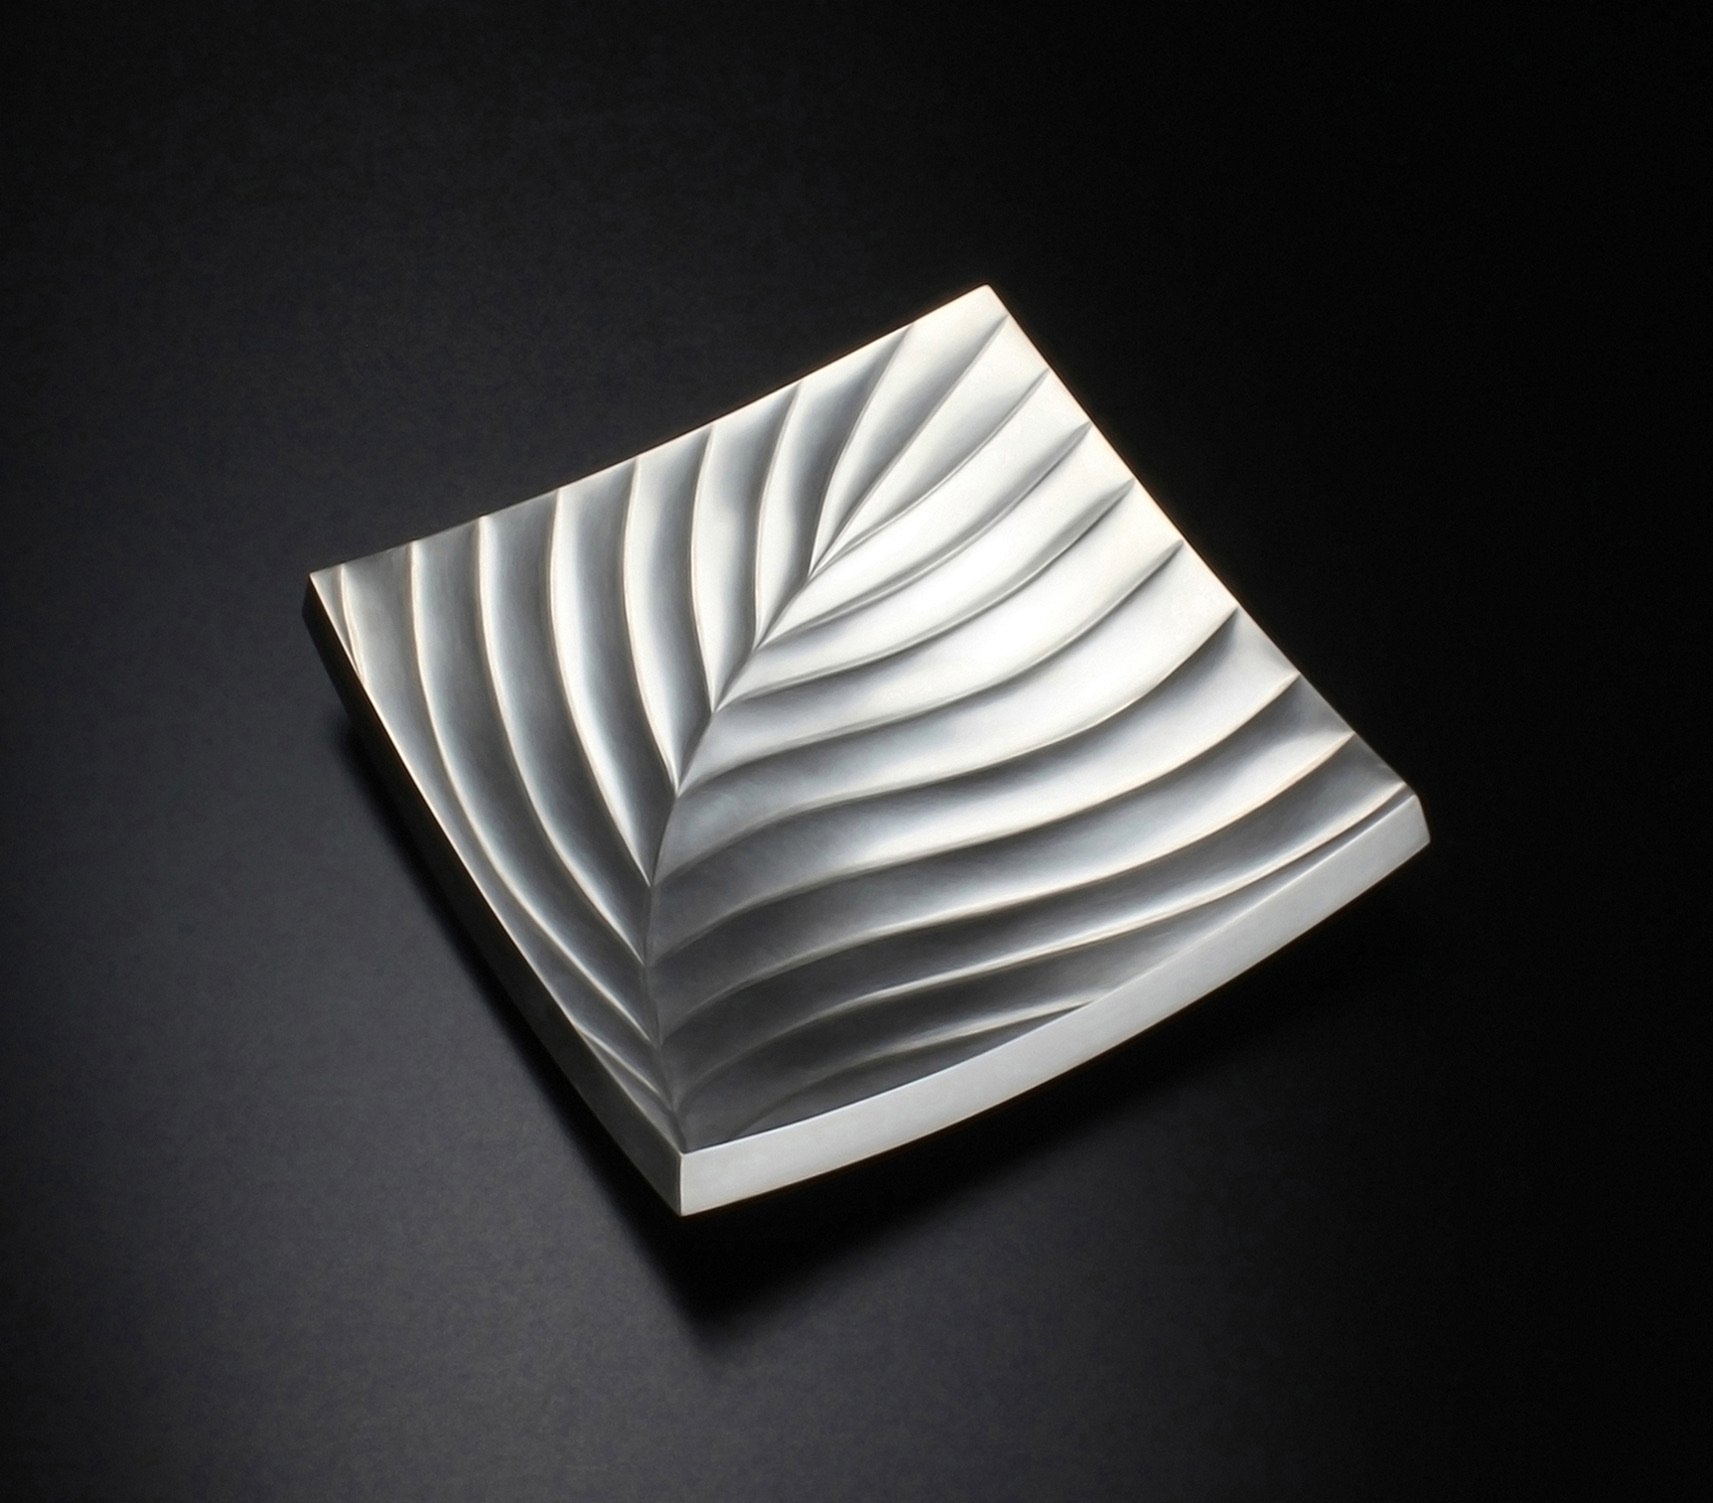 A contemporary designer silversmith based in London, creating elegant limited edition and bespoke silverware.